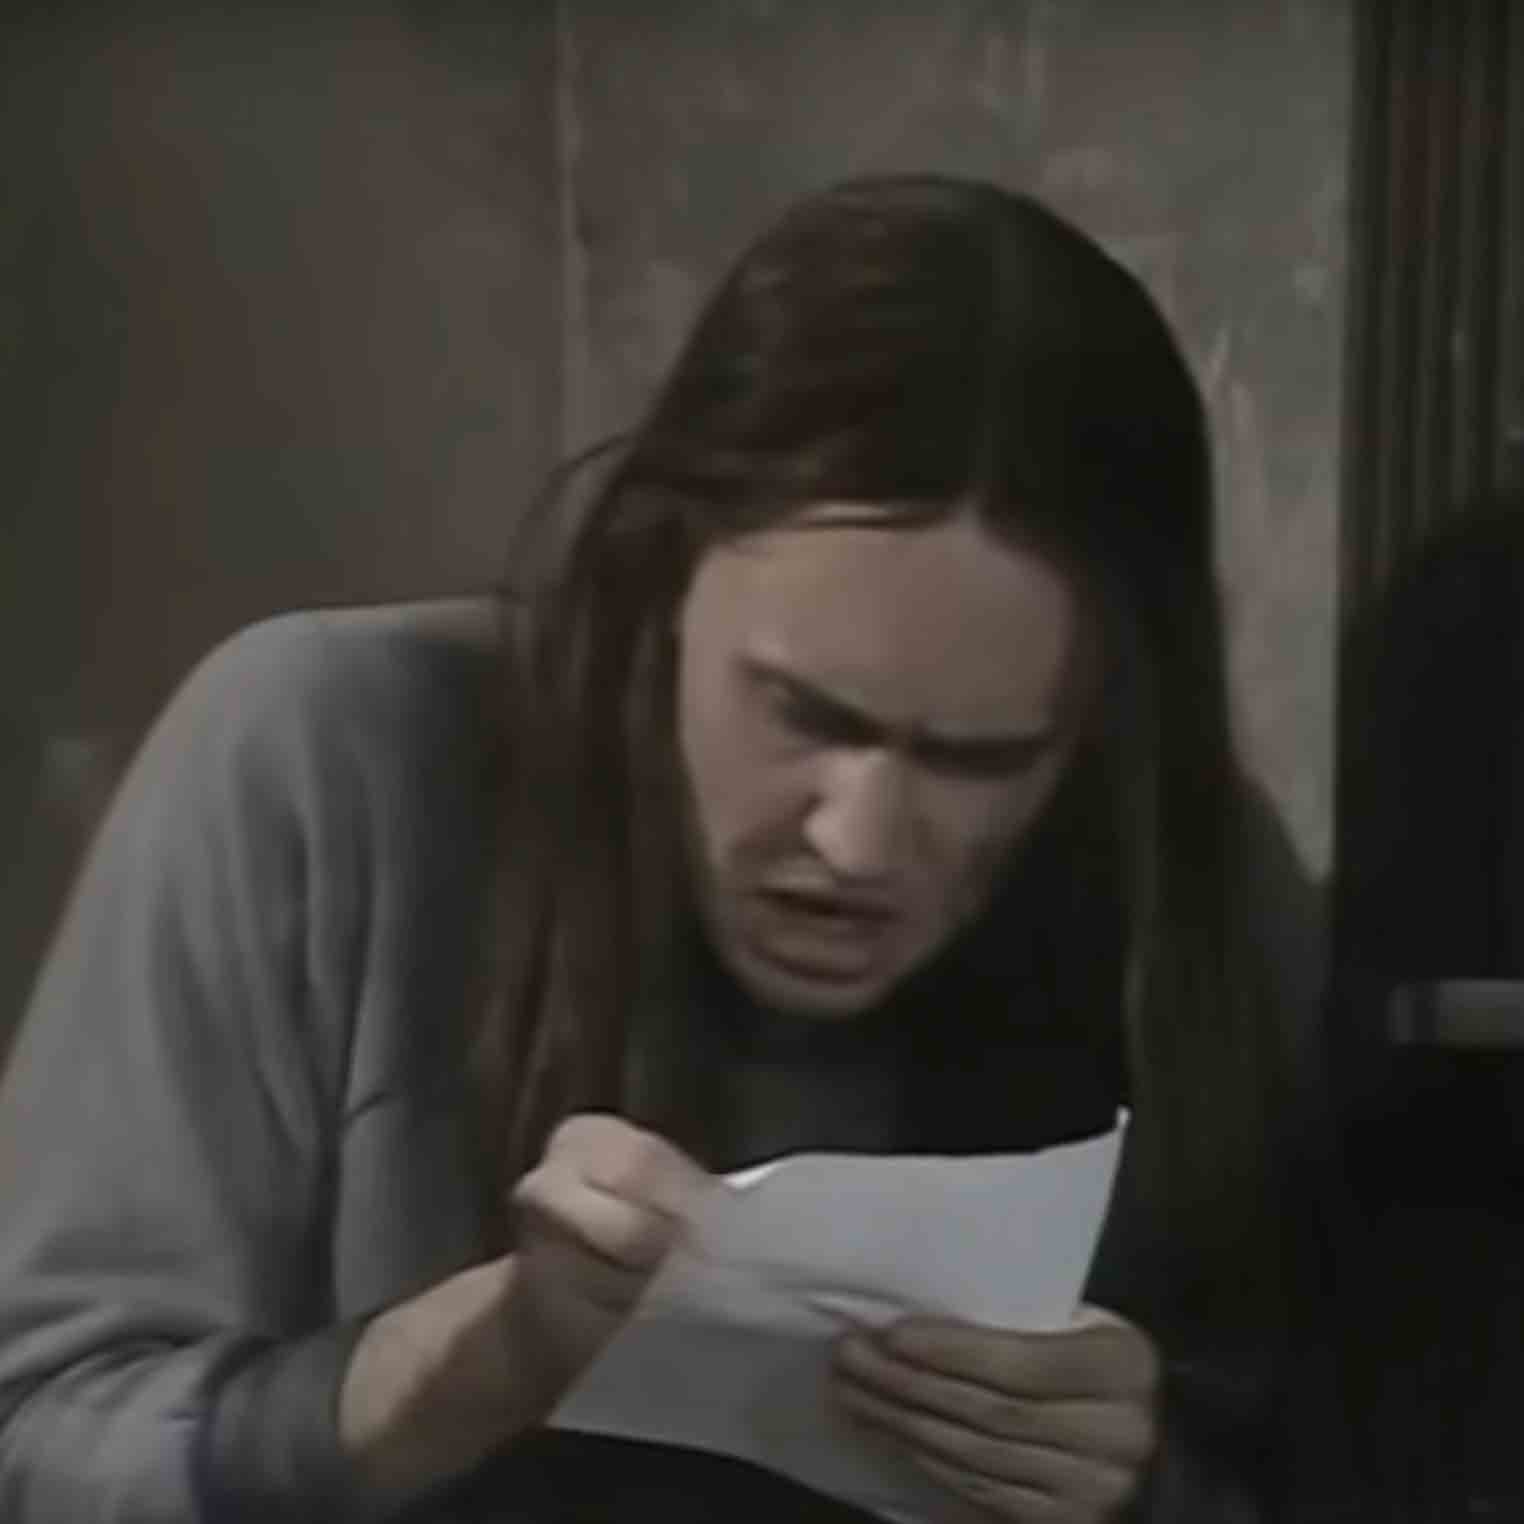 Neil from “The Young Ones” writing a letter.